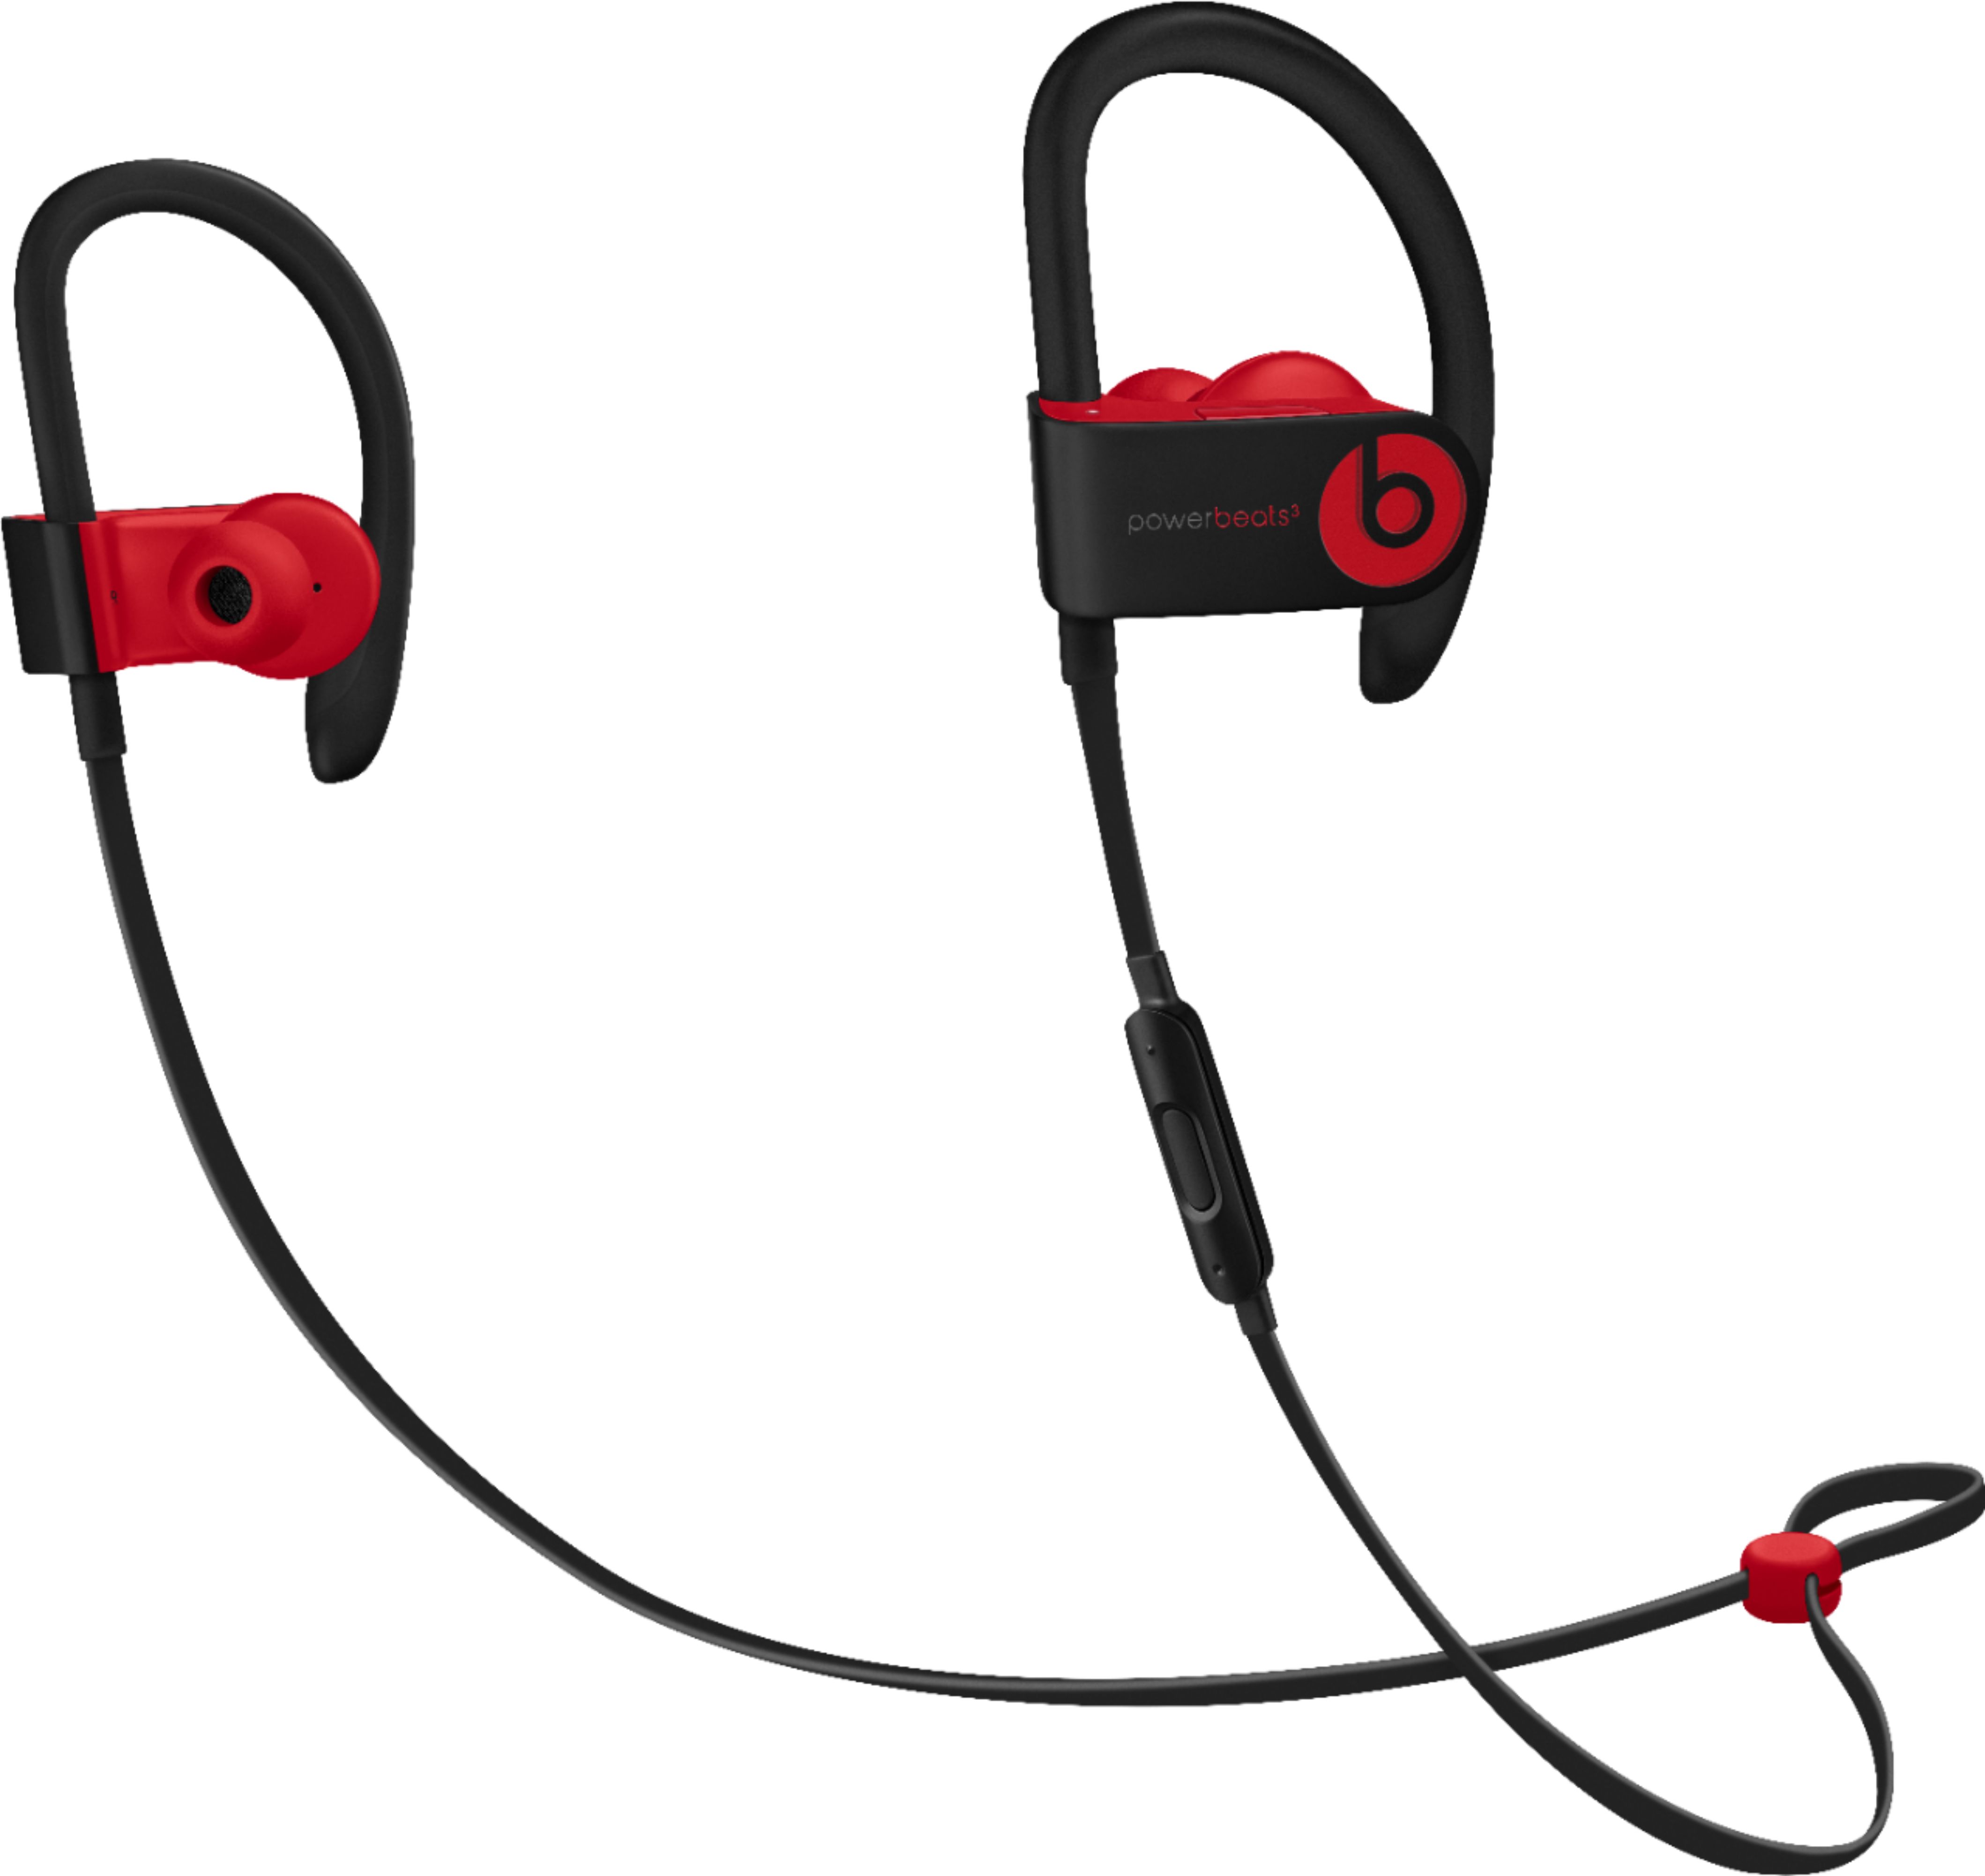 black and red powerbeats